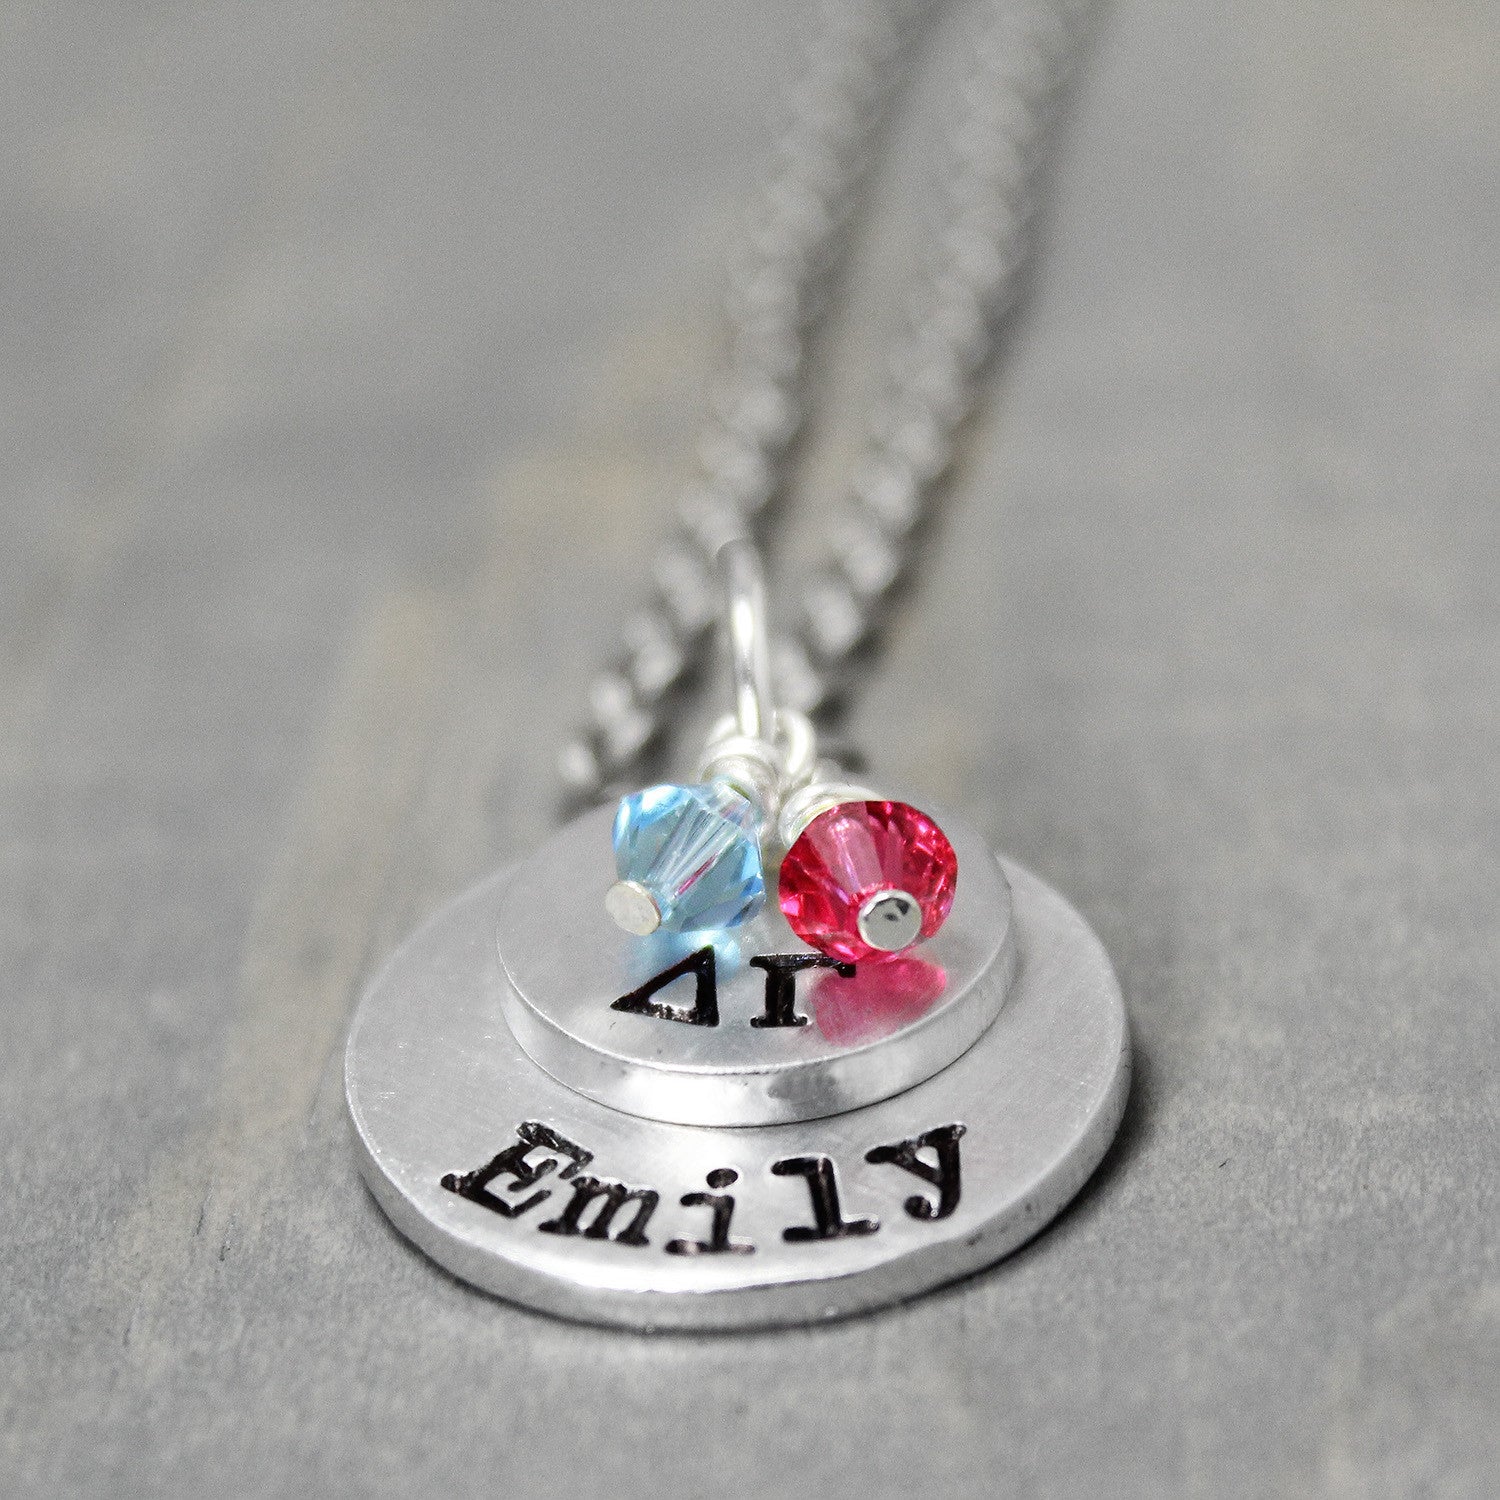 Delta Gamma Stacked Necklace 